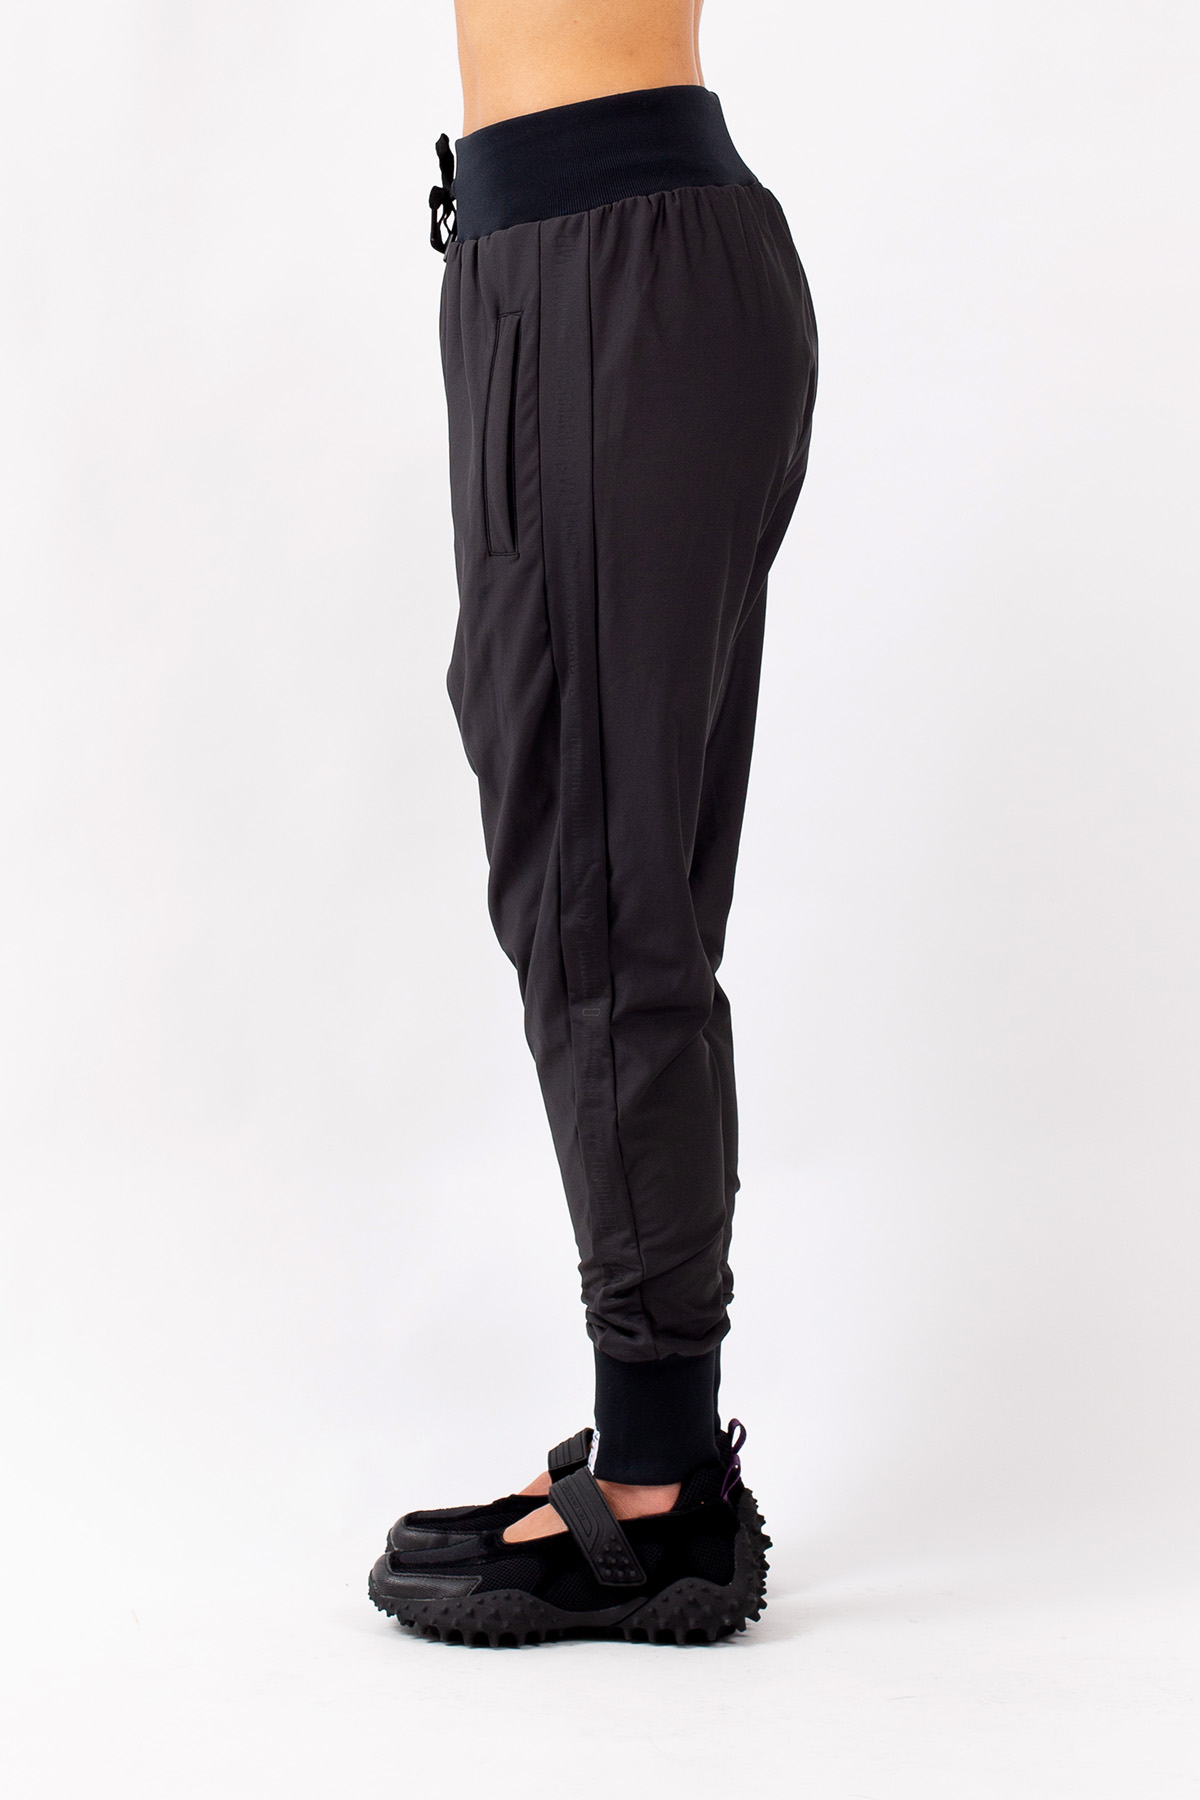 Lole Travel Pant in Black 6